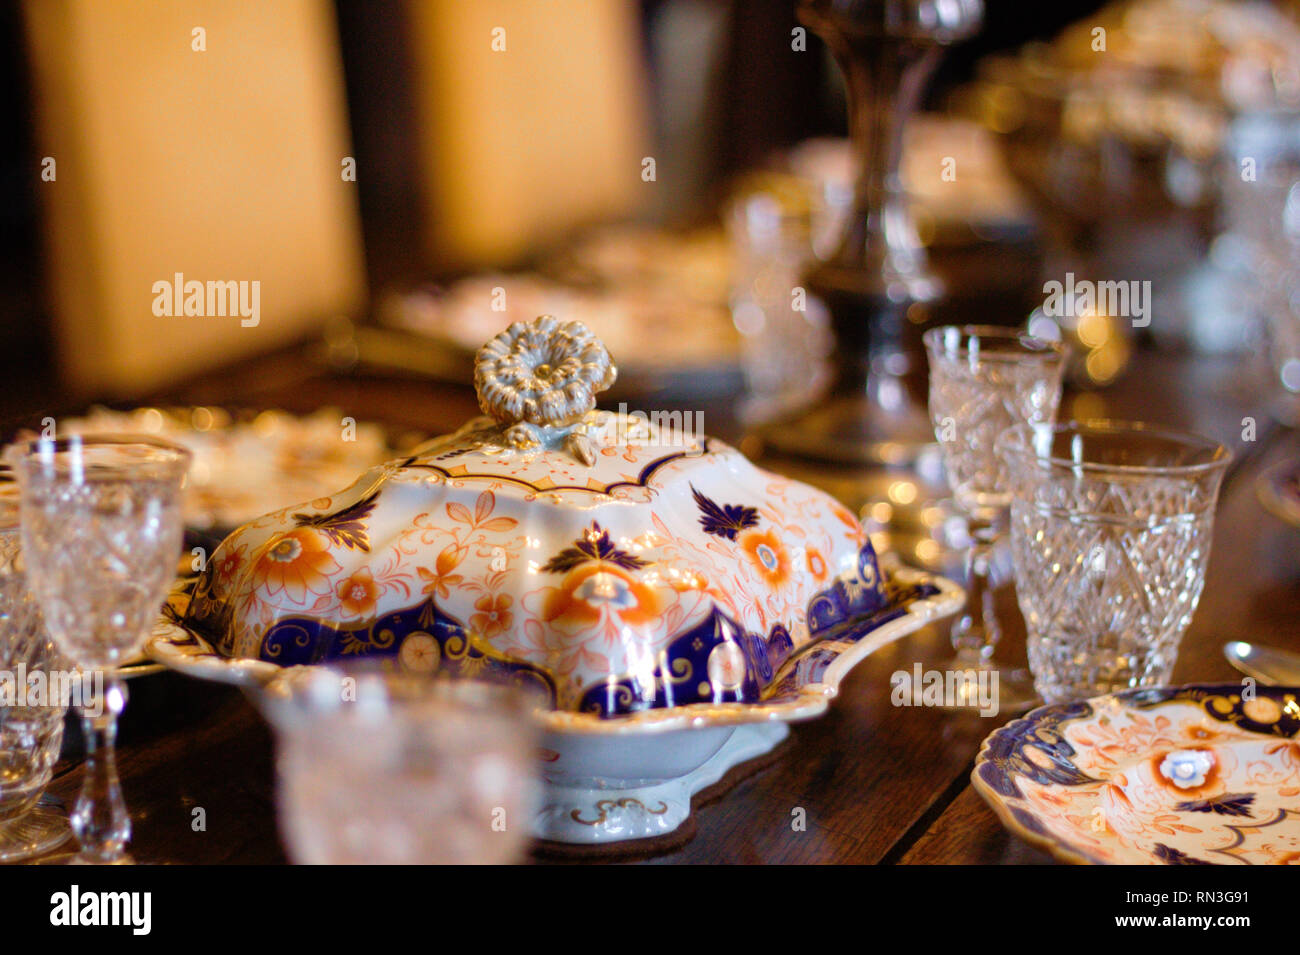 Porcelain and glasses on a antique laid table at Scotney castle in South England. Stock Photo